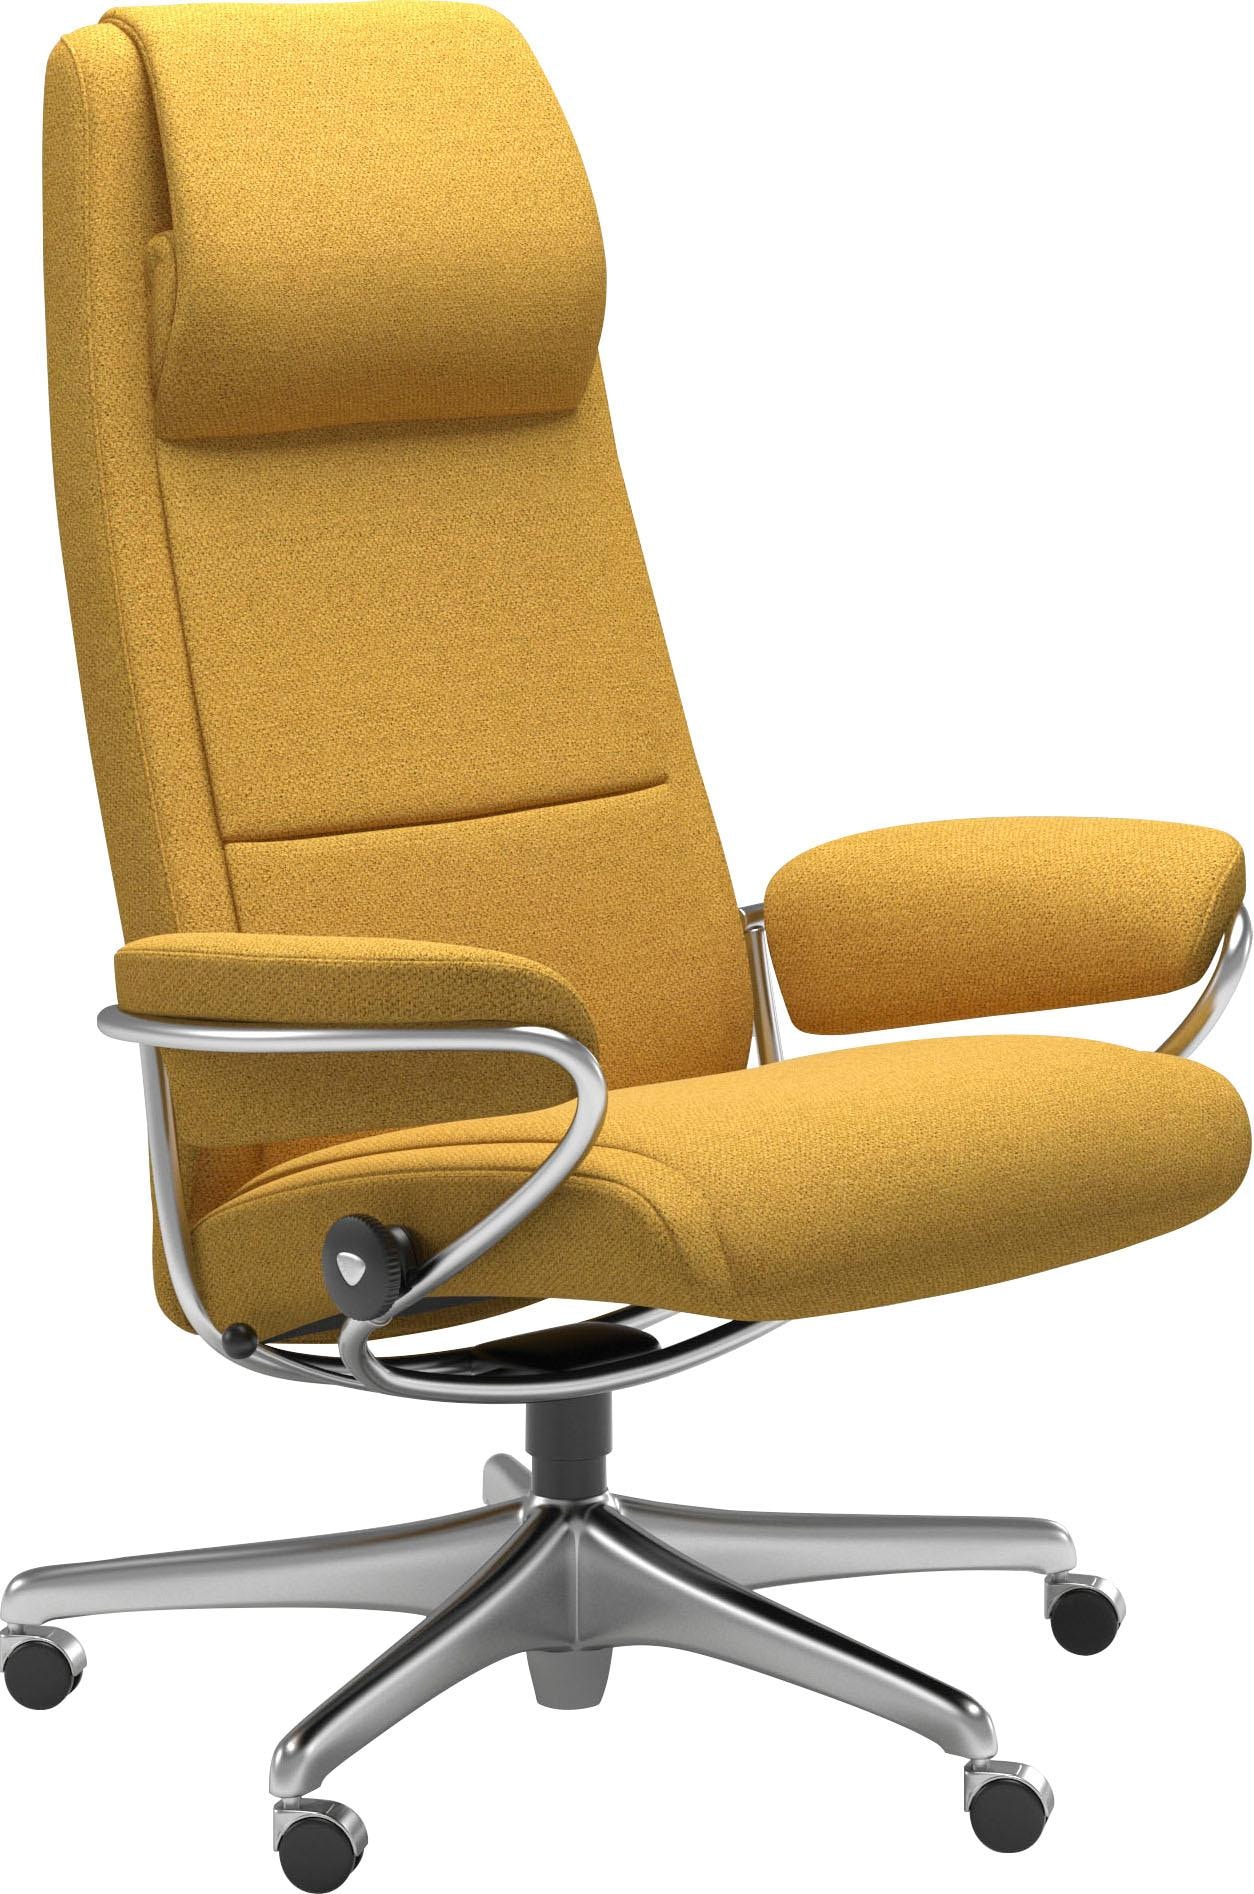 Home Back, OTTO High »Paris«, Relaxsessel Gestell Office Base, Stressless® Online Shop Chrom mit